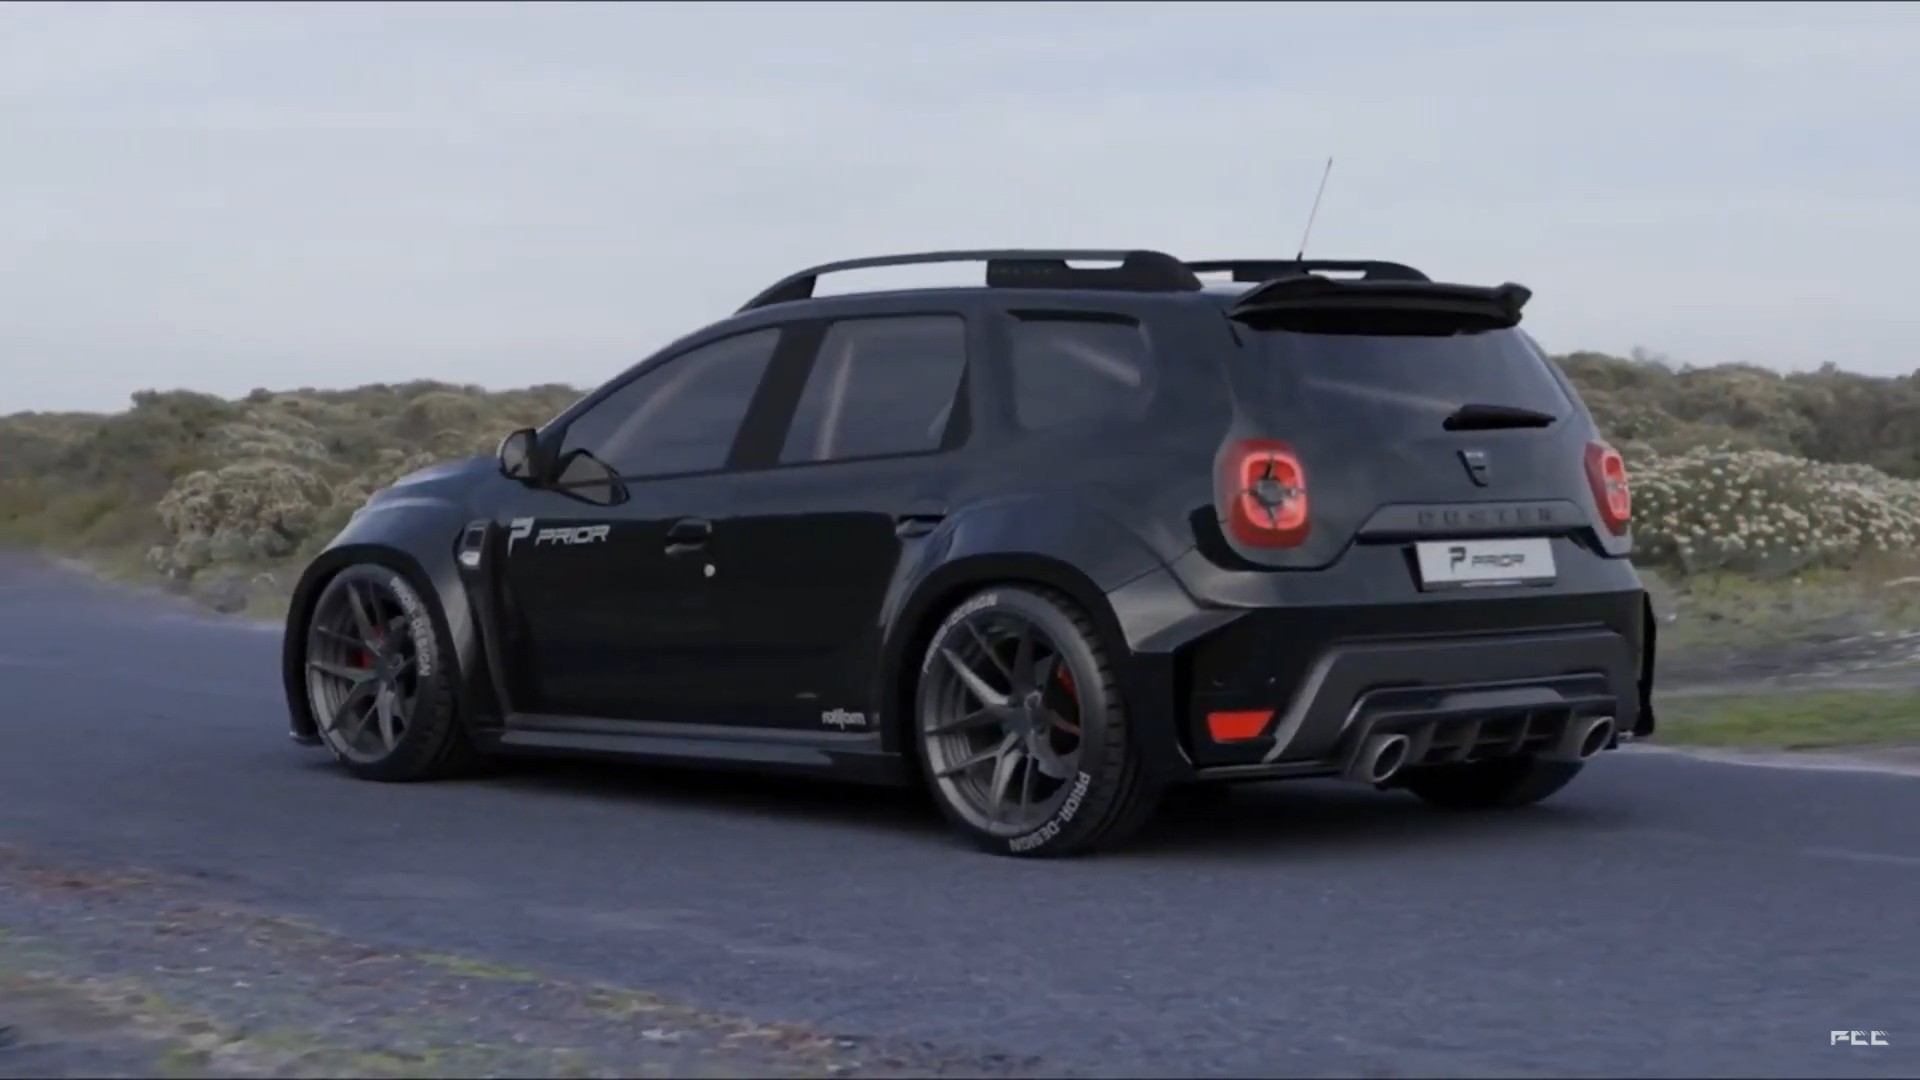 Dacia Duster Tuning? Why not! By Prior Design